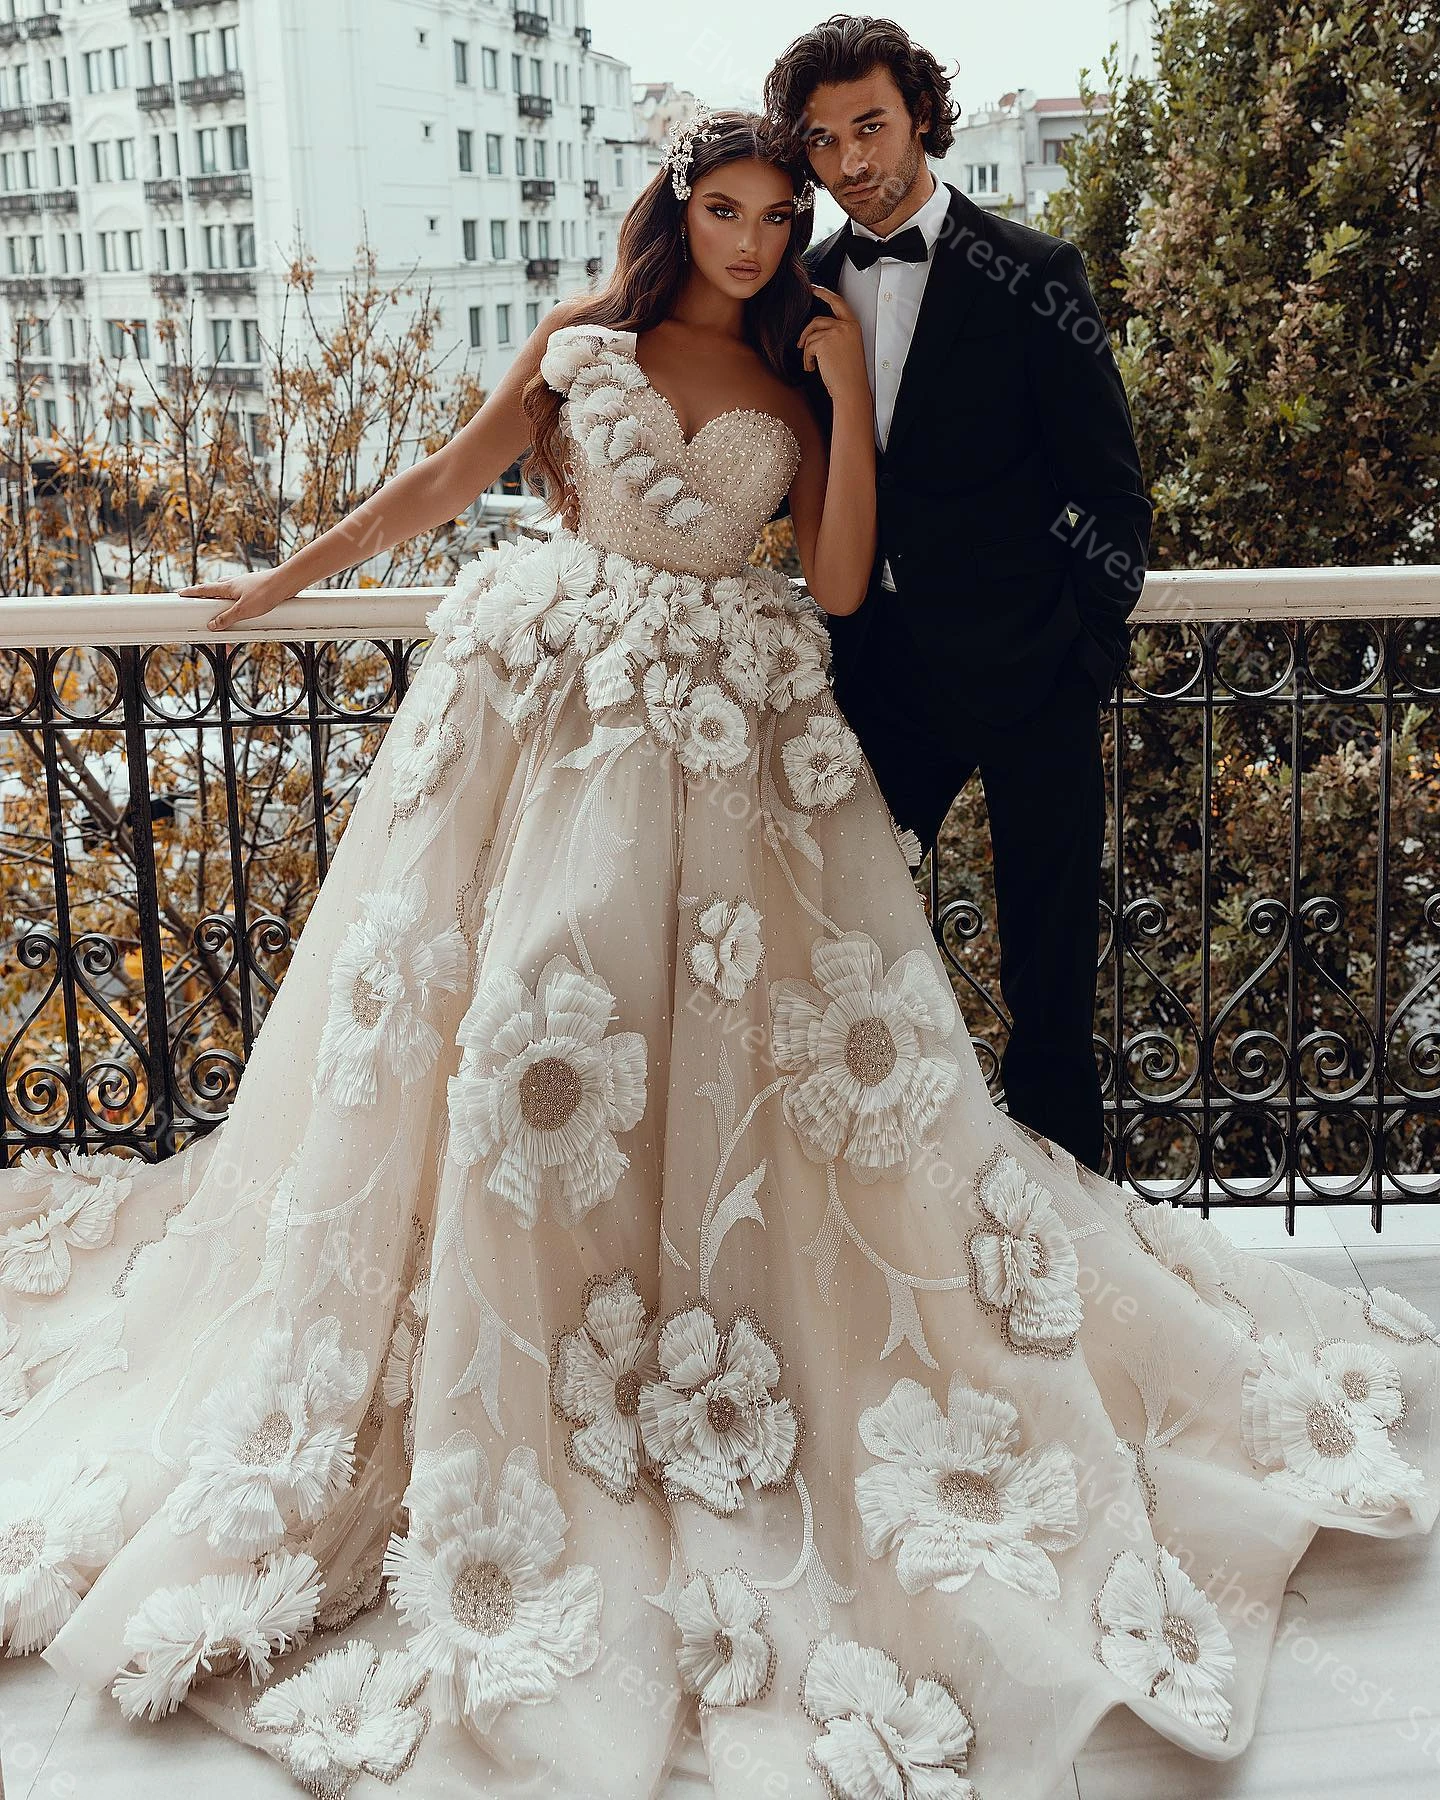 

Glamorous Ball Gown Wedding Dresses Appliques Crystals Floral Sleeveless Vintage Bridal Gowns Sweetheart robes de mariée